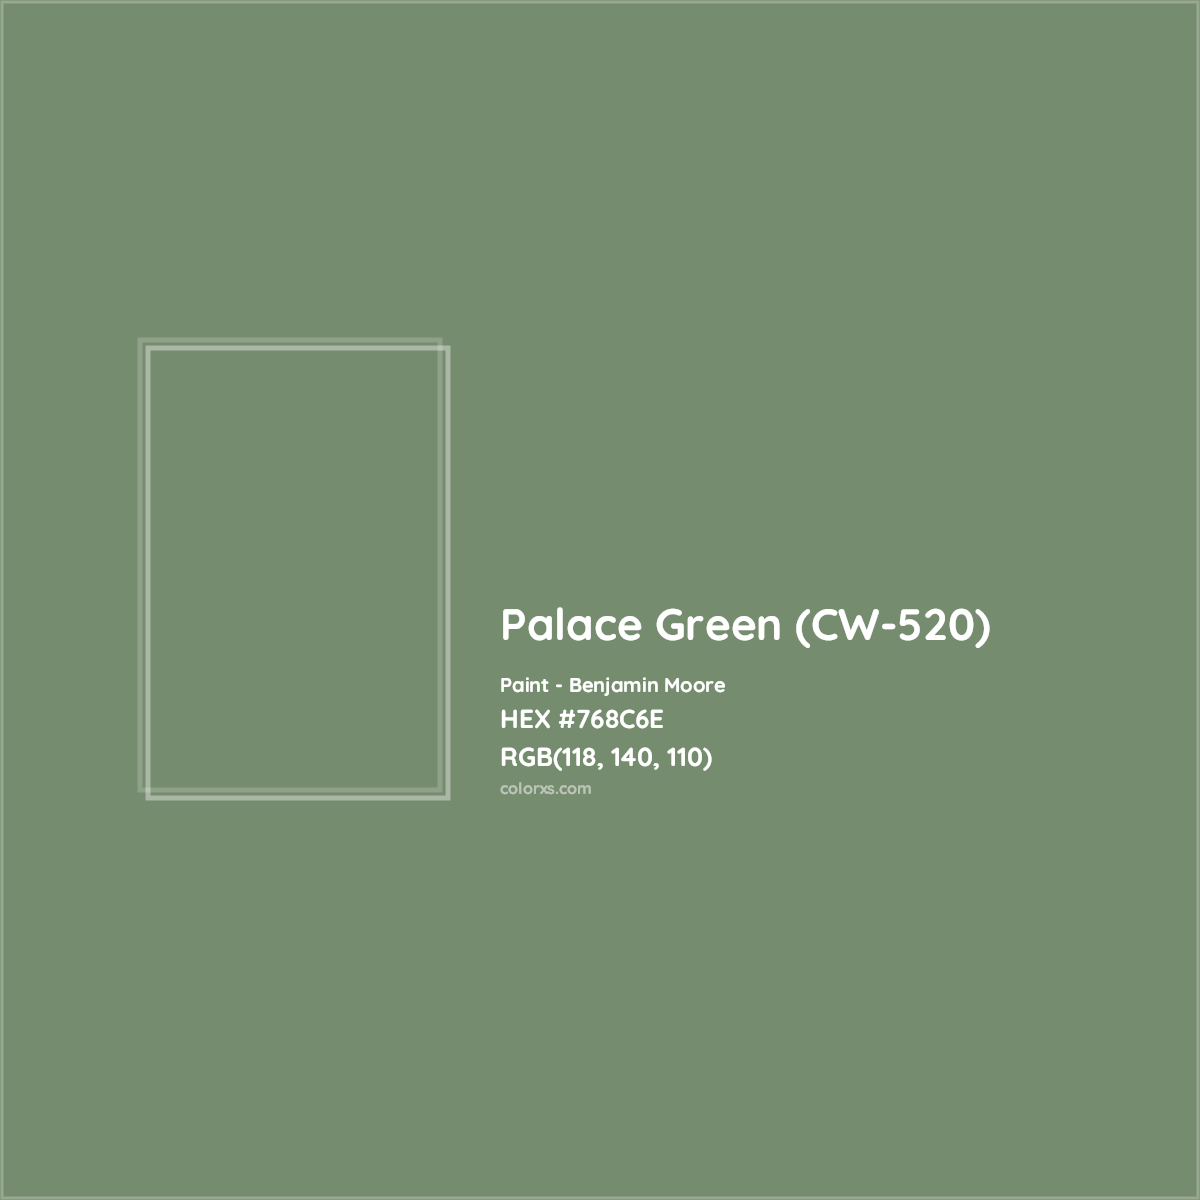 HEX #768C6E Palace Green (CW-520) Paint Benjamin Moore - Color Code